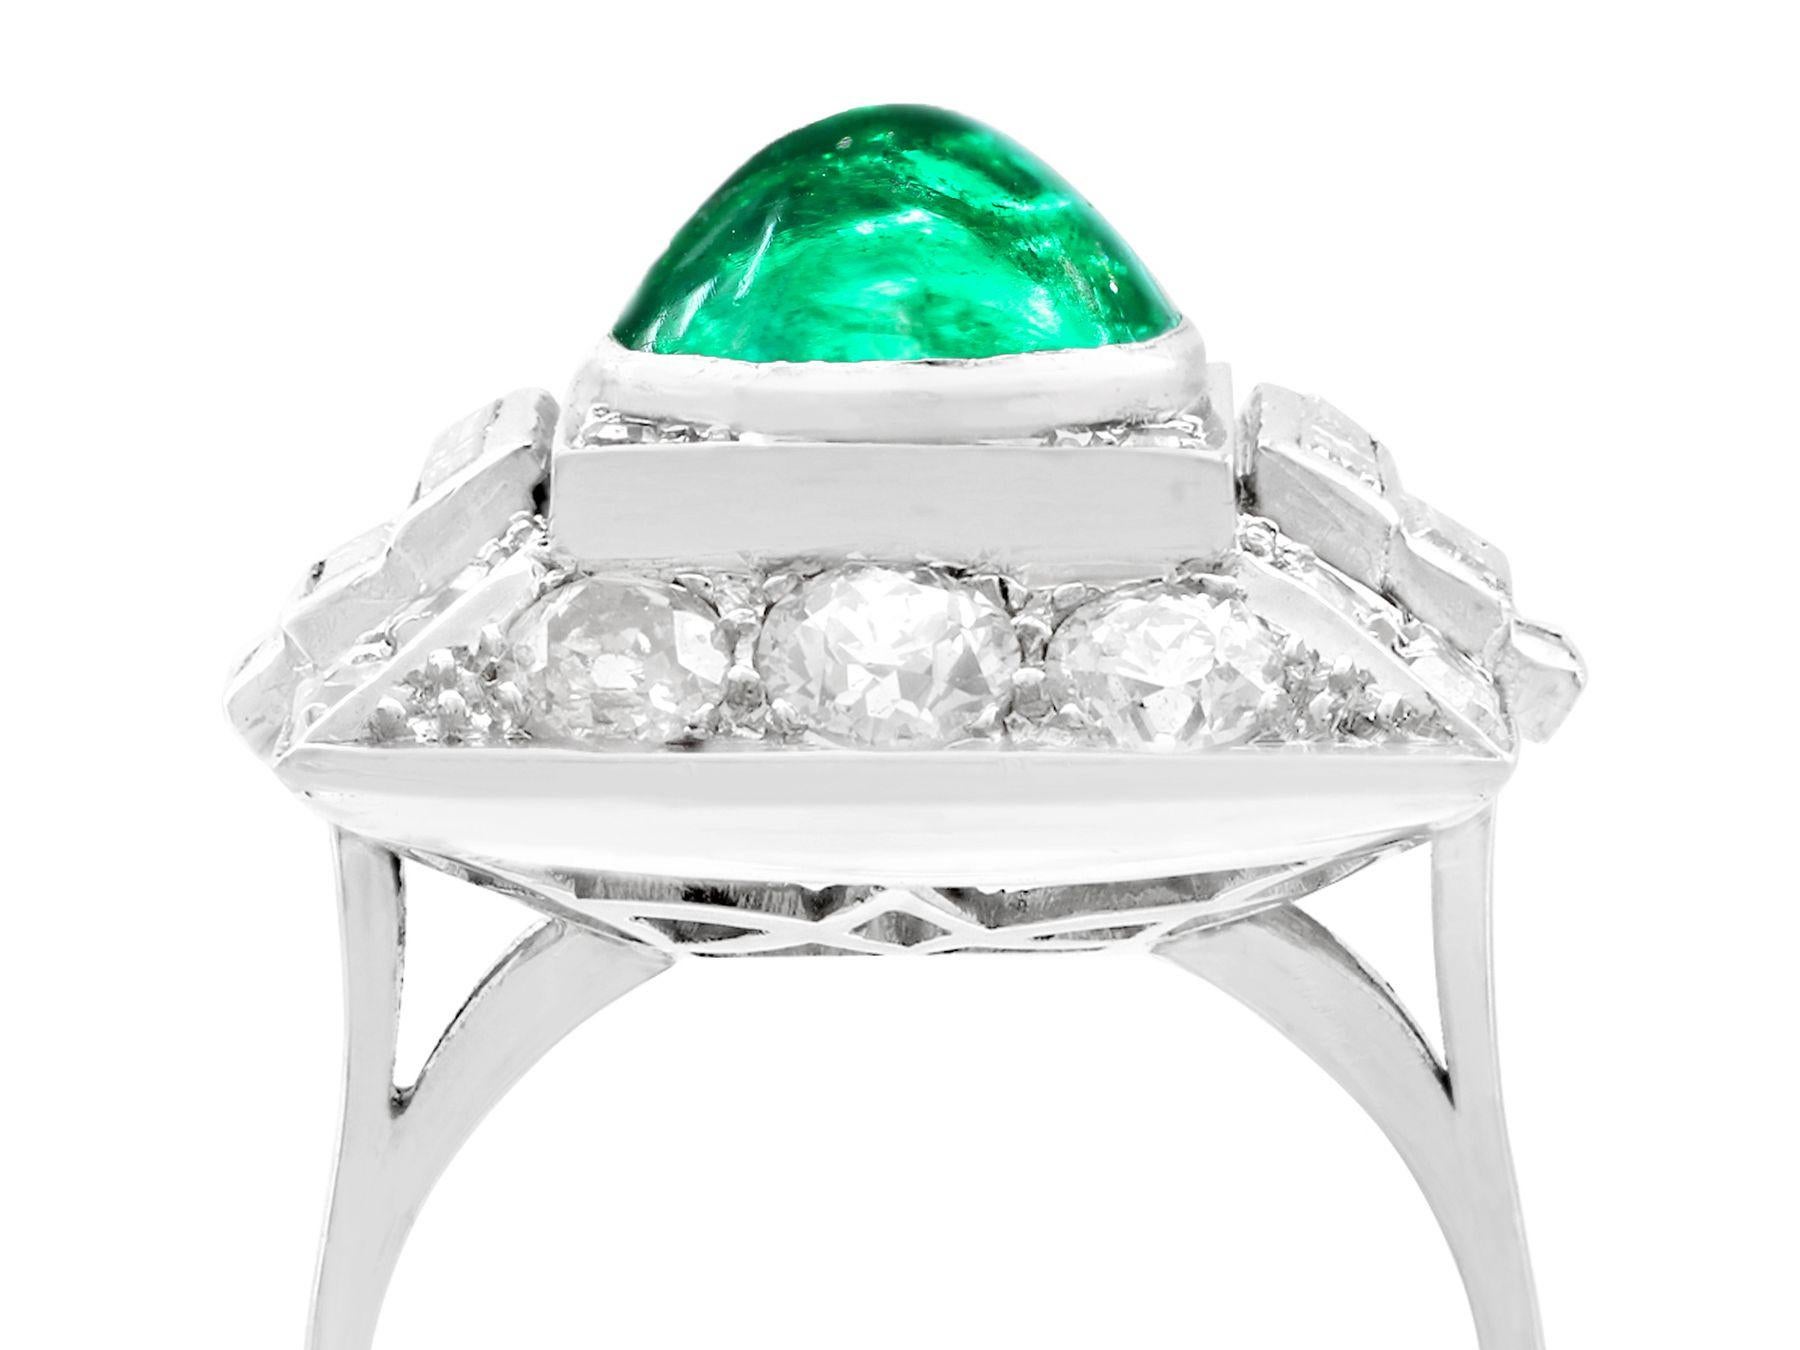 A stunning antique 3.40 carat Colombian emerald and 2.72 carat diamond, platinum cocktail ring; part of our diverse antique jewelry and estate jewelry collections.

This stunning, fine and impressive Colombian cabochon cut emerald cocktail ring has